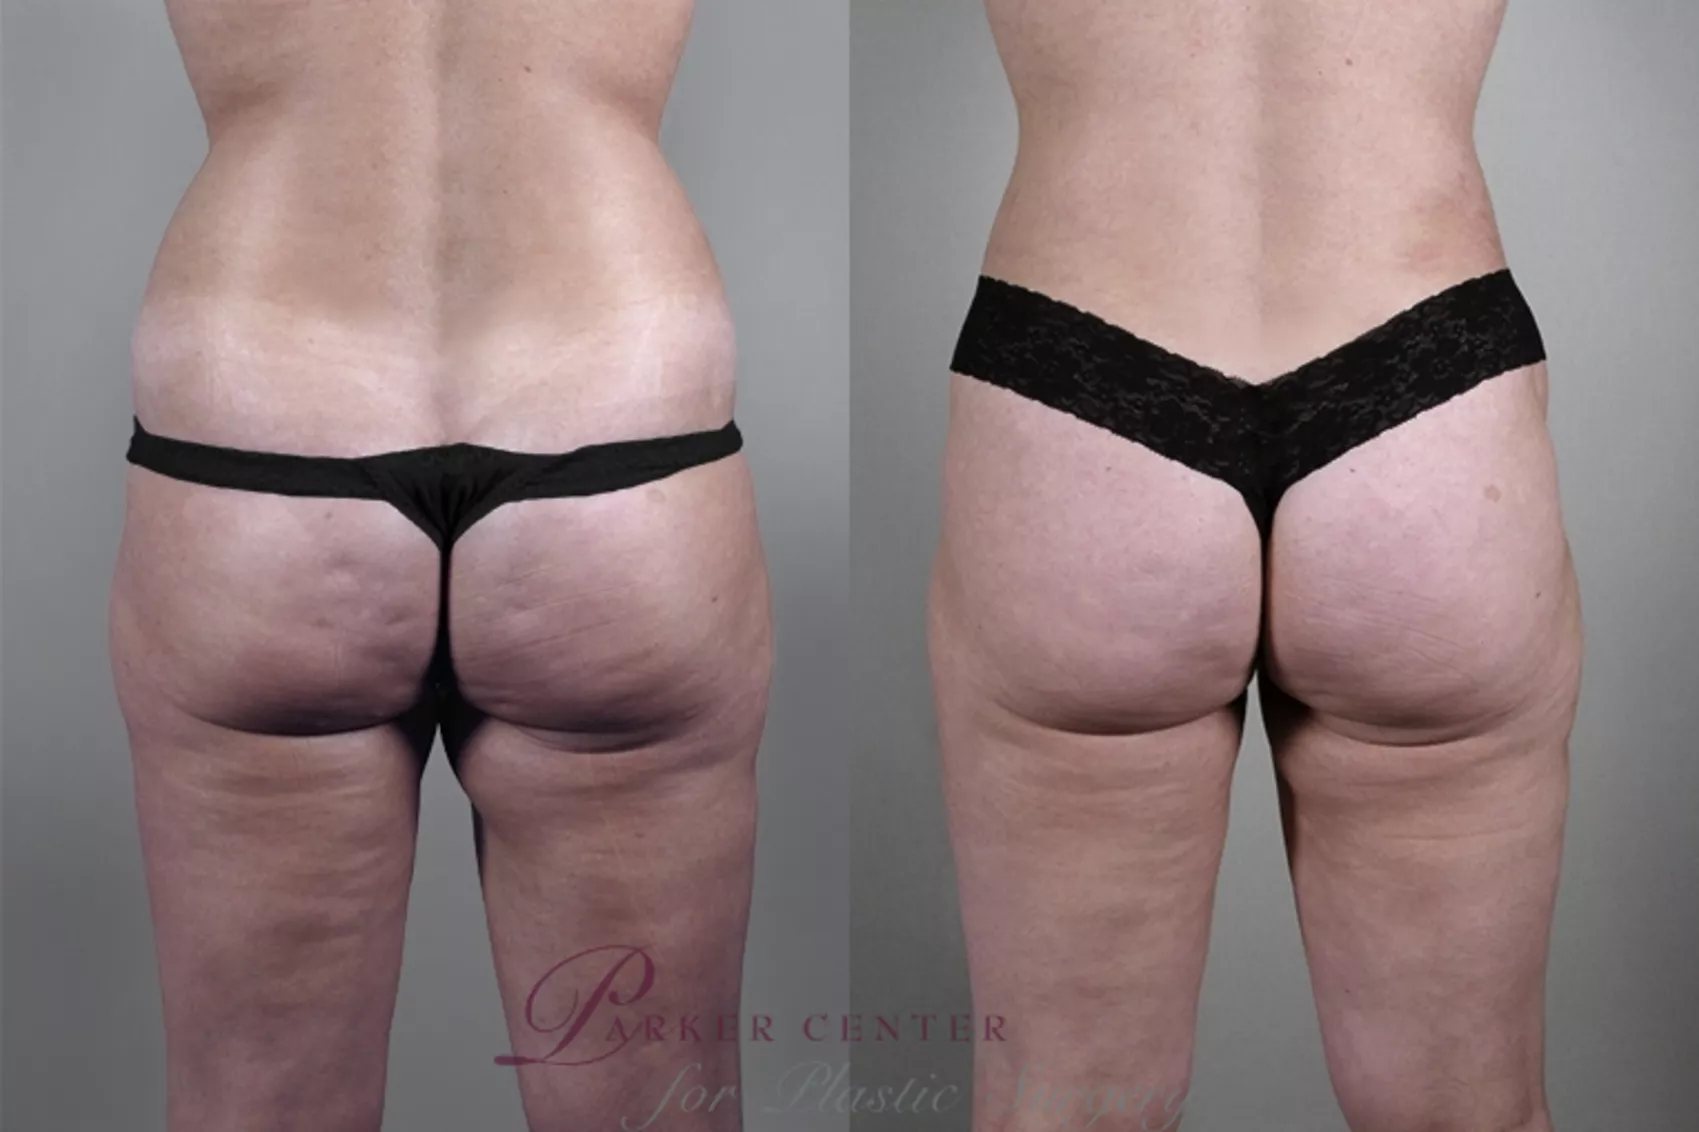 Bra Fat Liposuction with Vaser Lipo Before & After Photos New Jersey -  Reflections Center